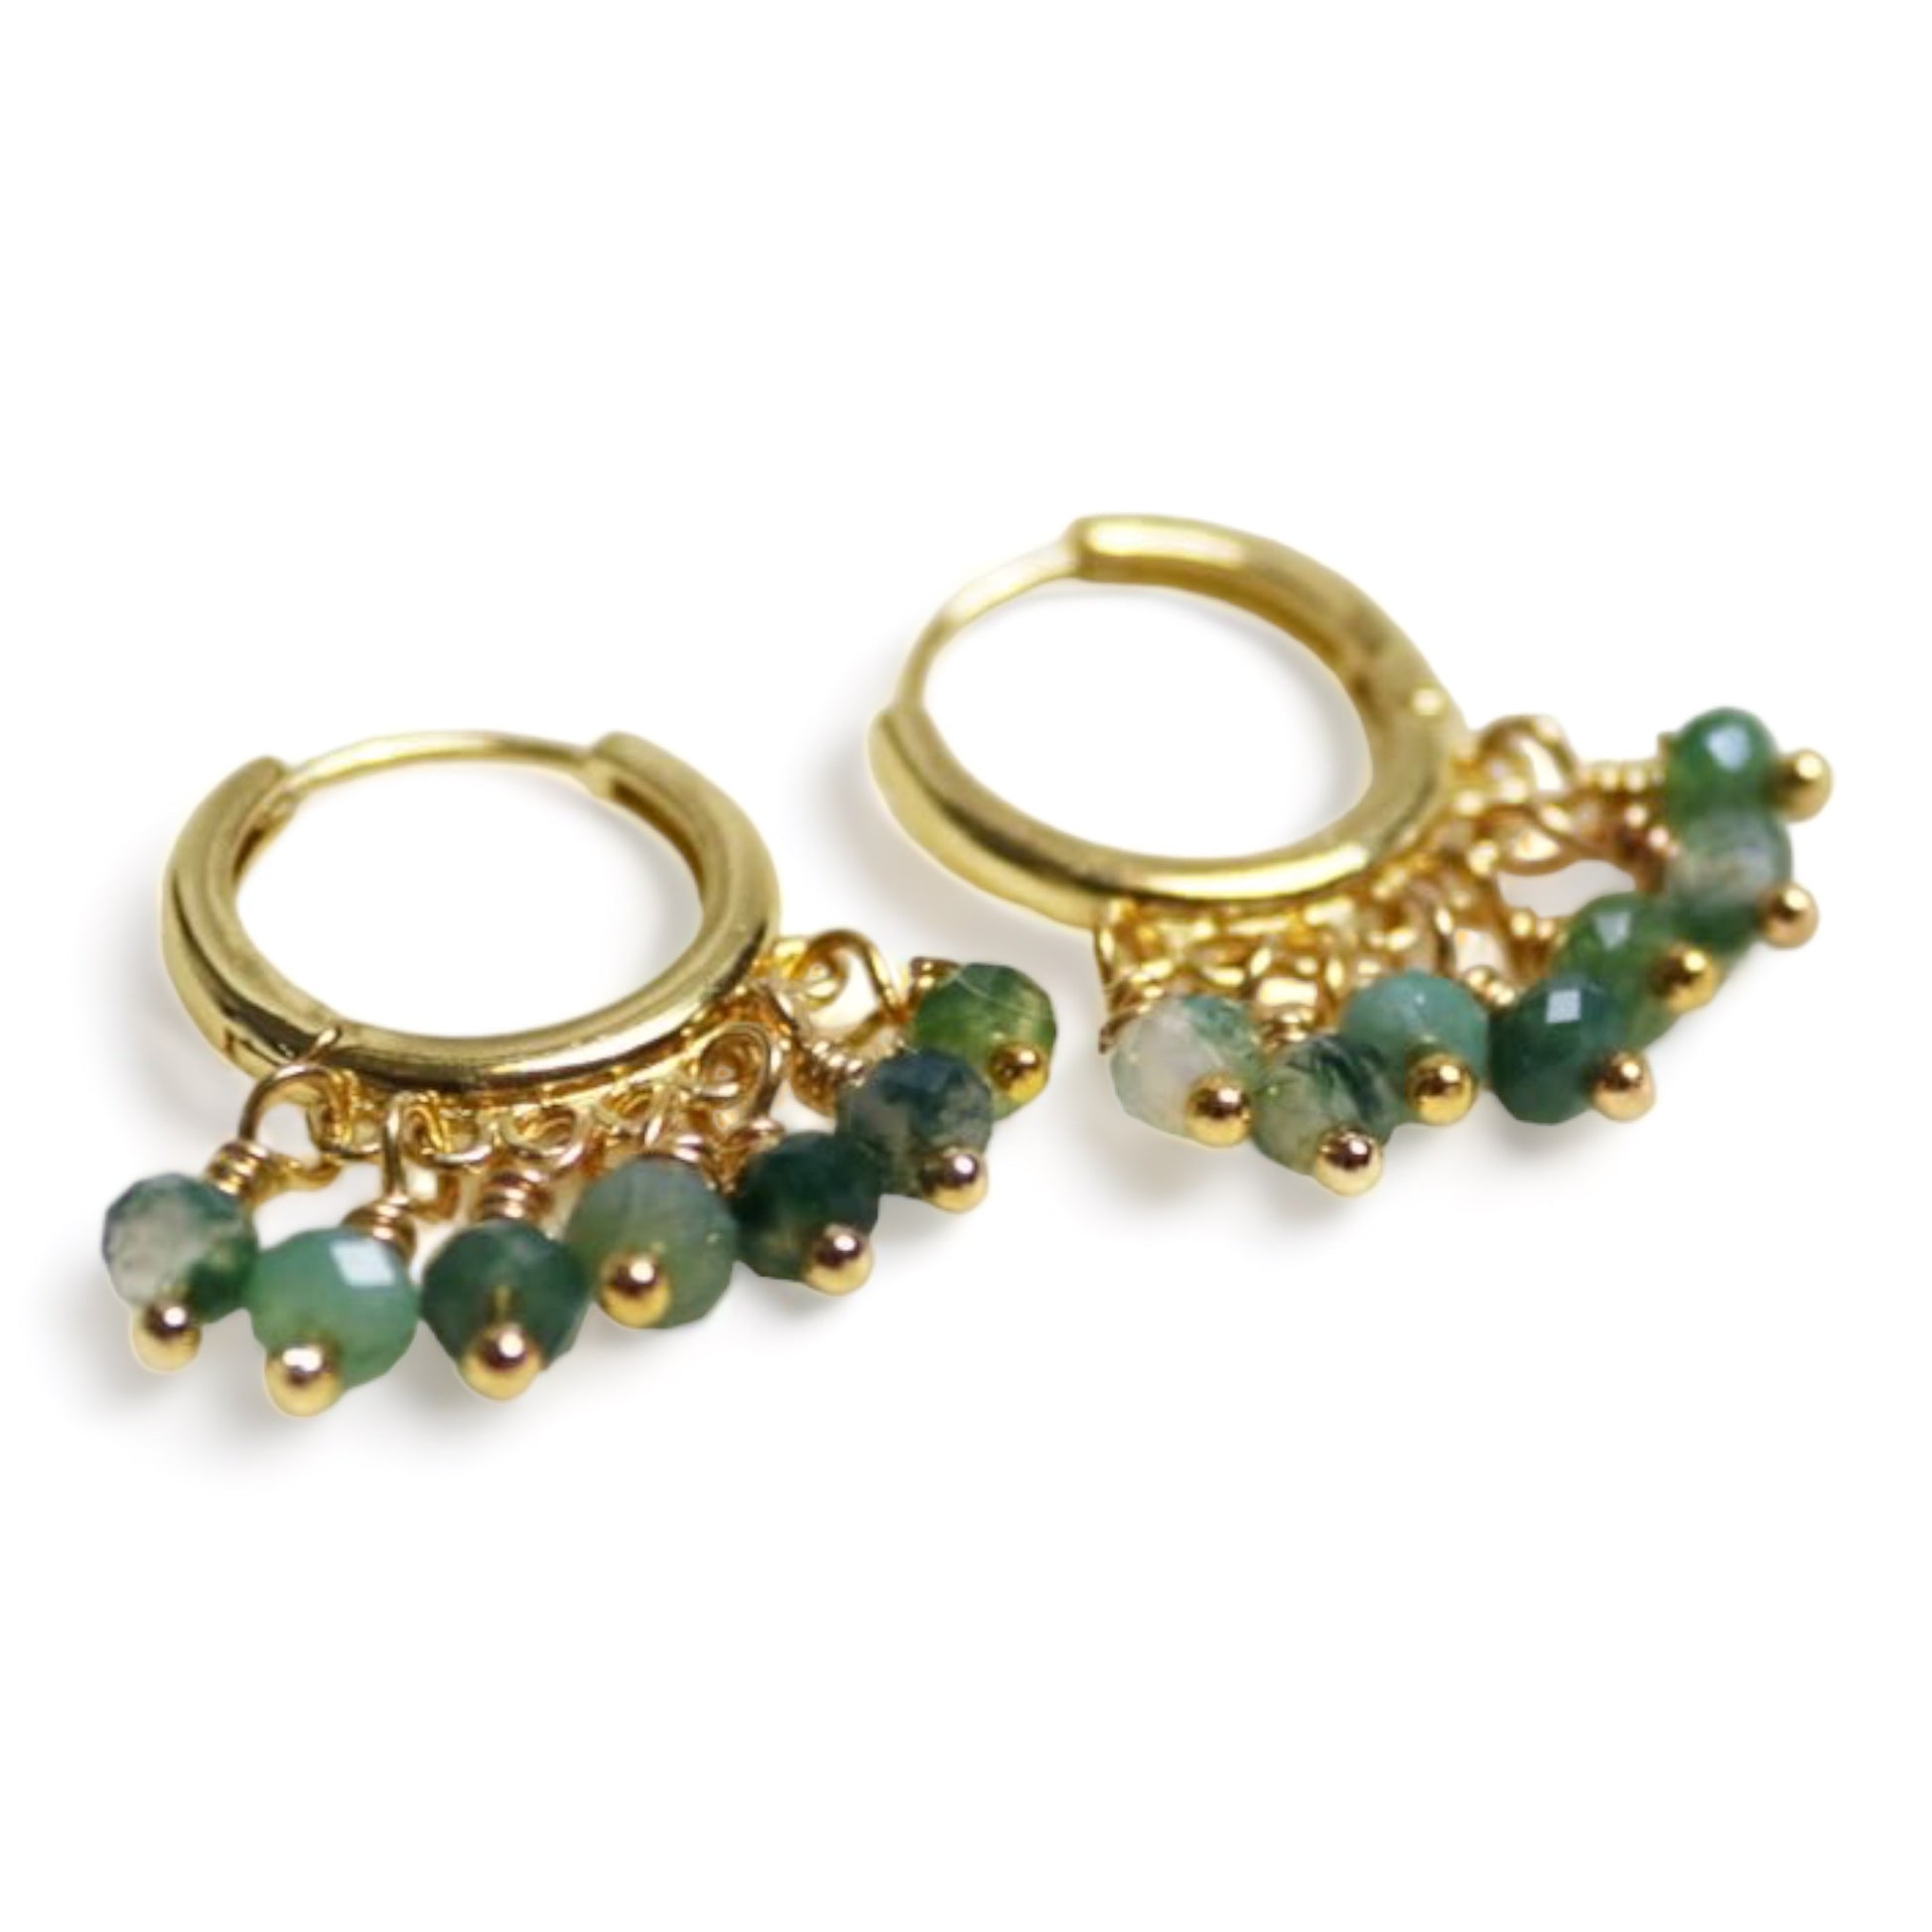 Creole / hoop earrings with different shades of green stones – Jkkajewelry